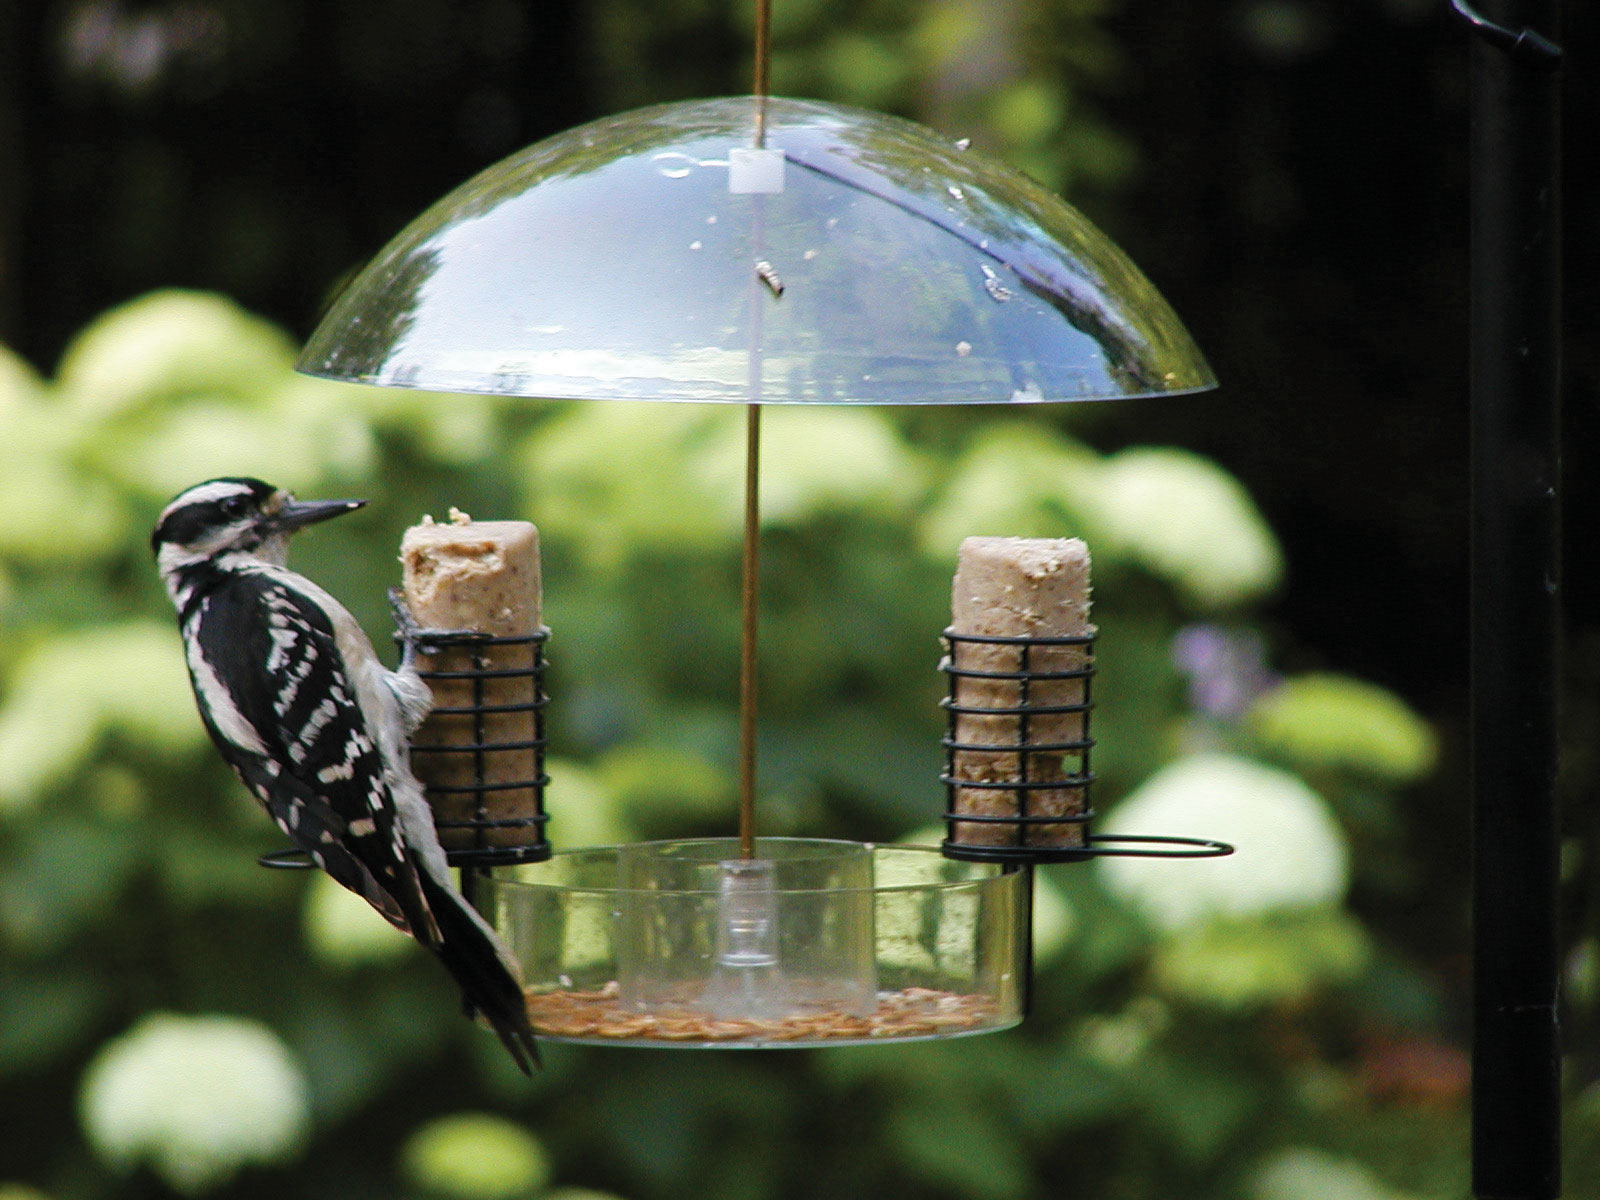 Birds Choice Supper Dome Seed, Suet, and Mealworm Bird Feeder